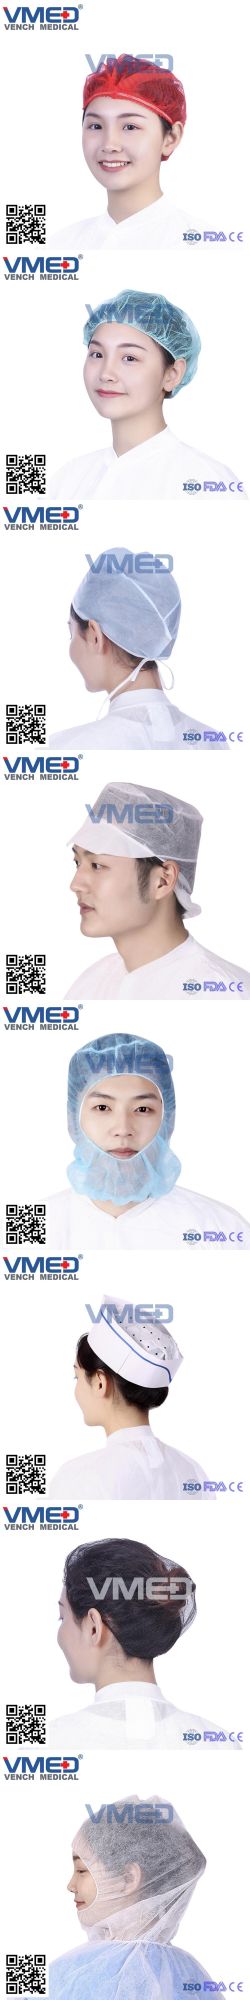 Medical/Surgical/Protective/Operation/Space/ Surgeon Cap/ Round Cap, Disposable Non-Woven Hood with Face Mask, Disposable Astronaut Cap